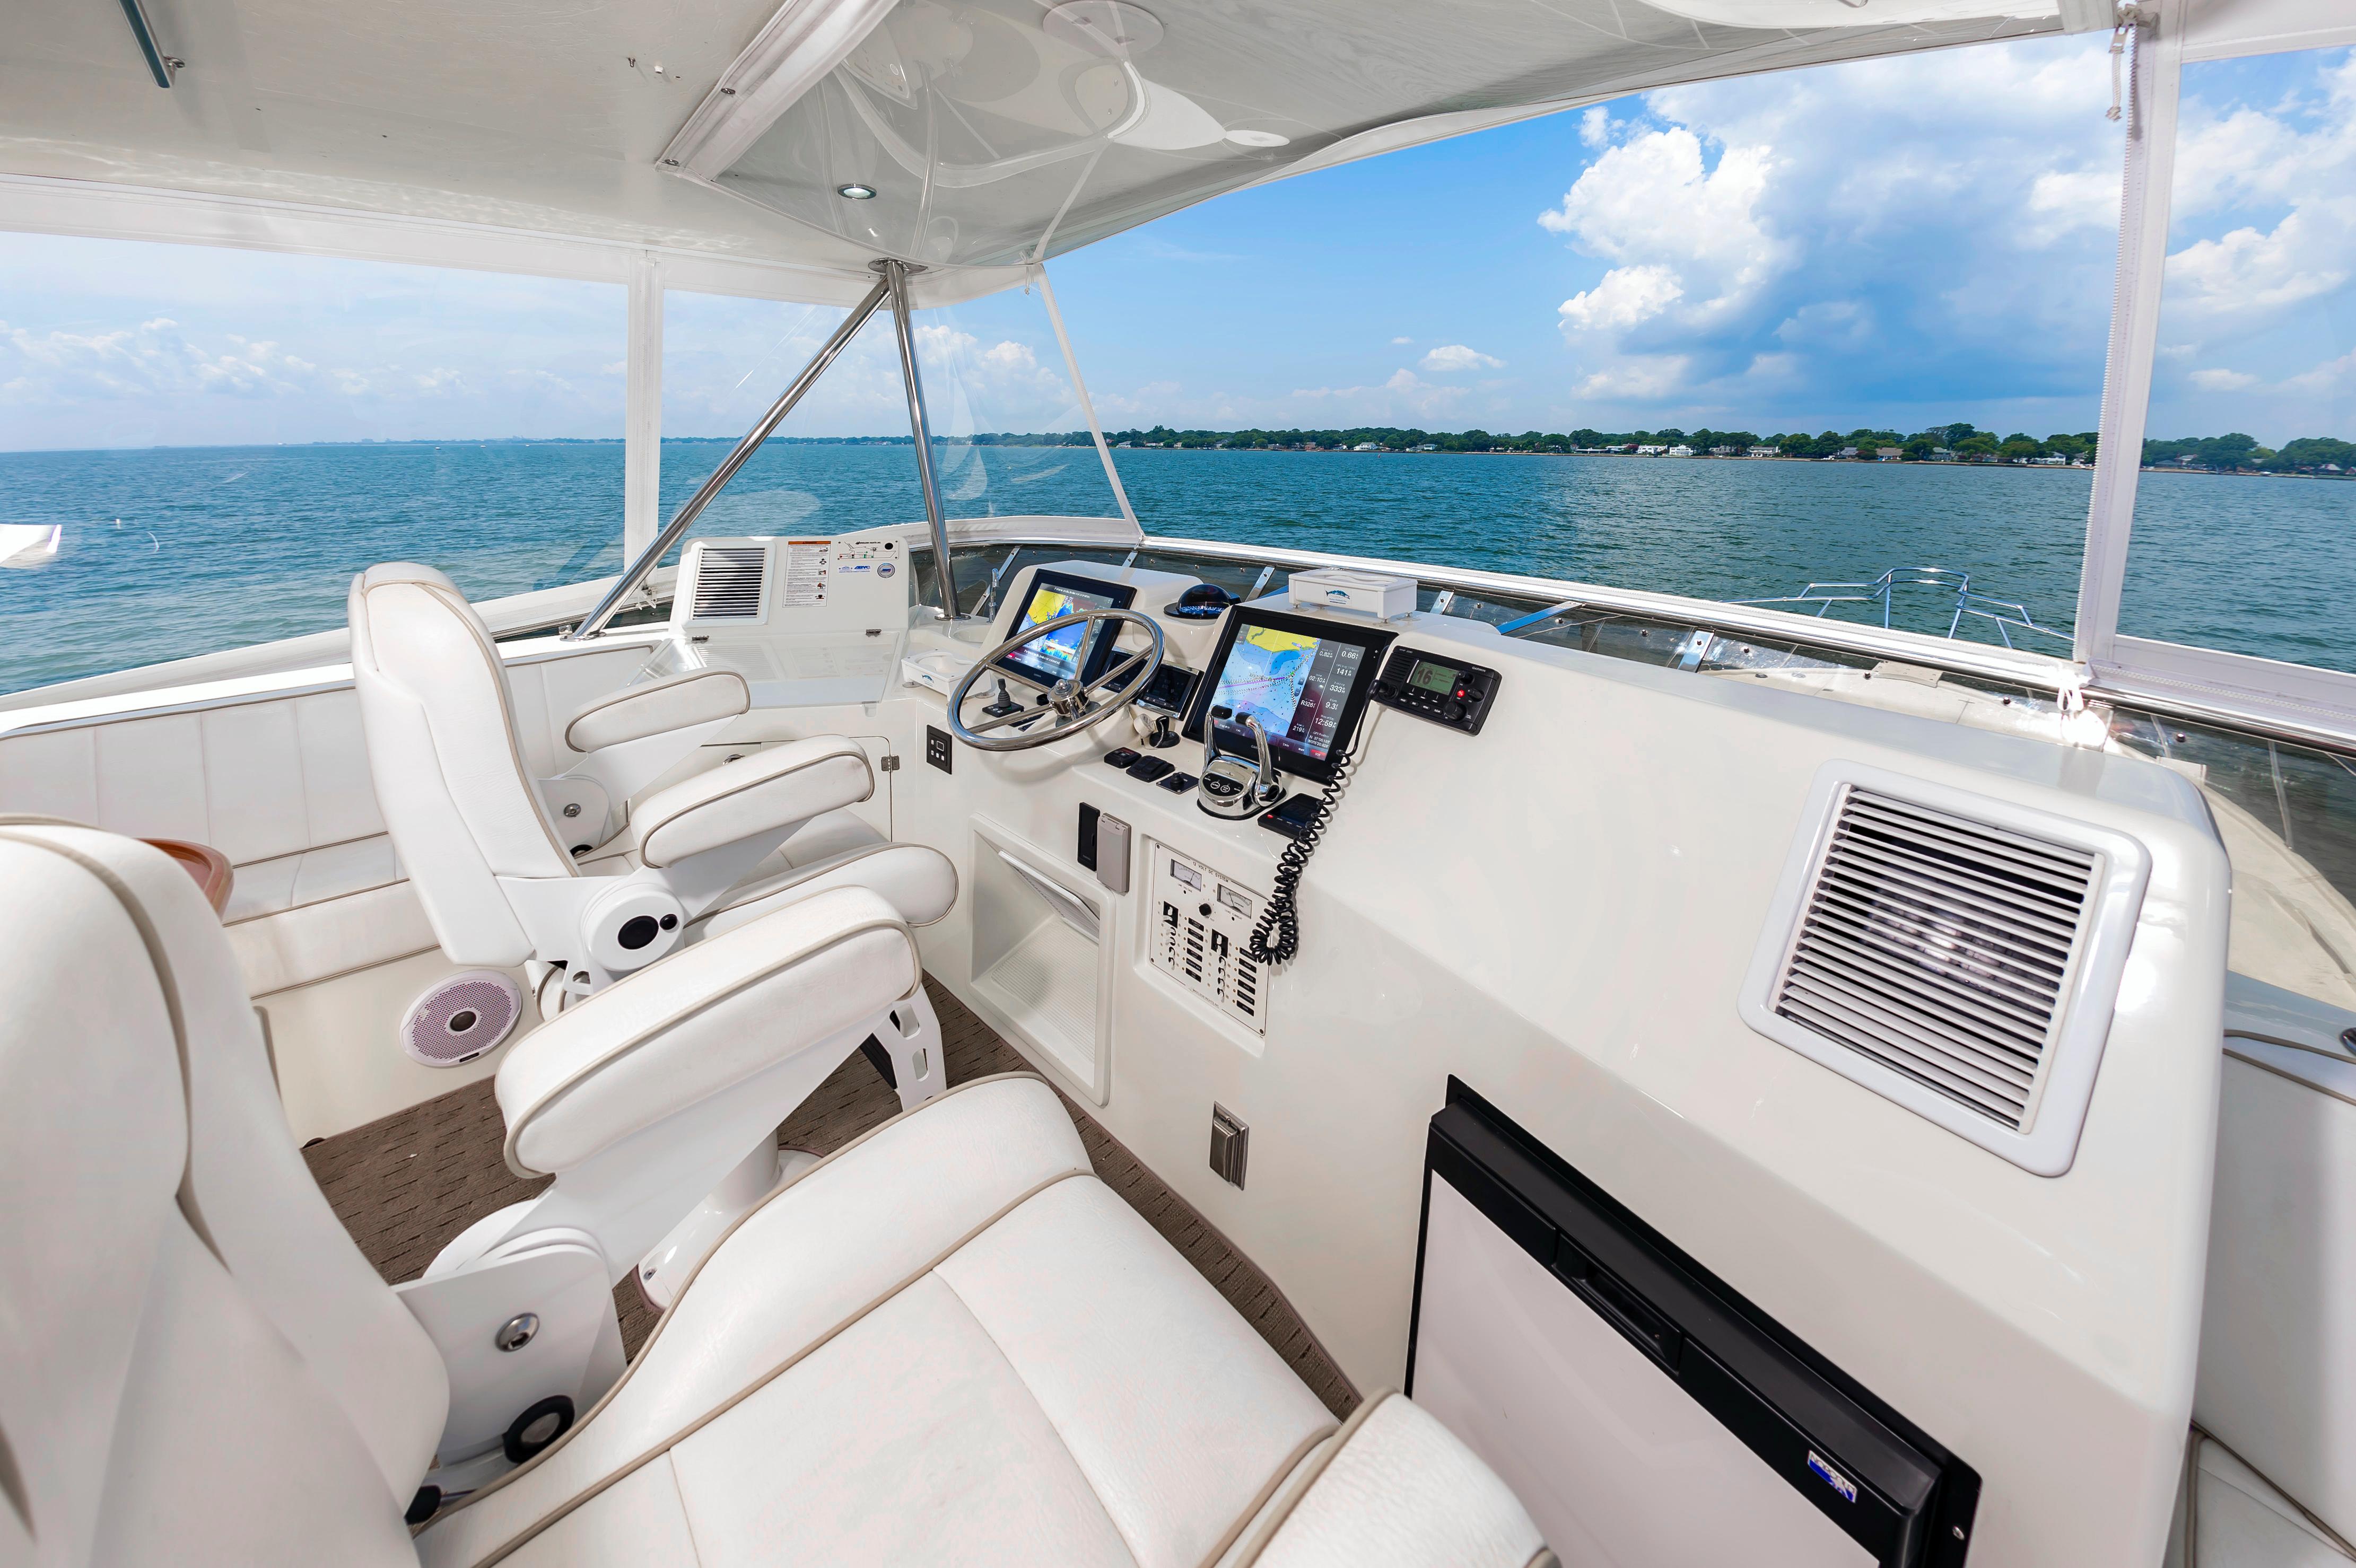 2016 Mikelson 50' S/F, main helm station